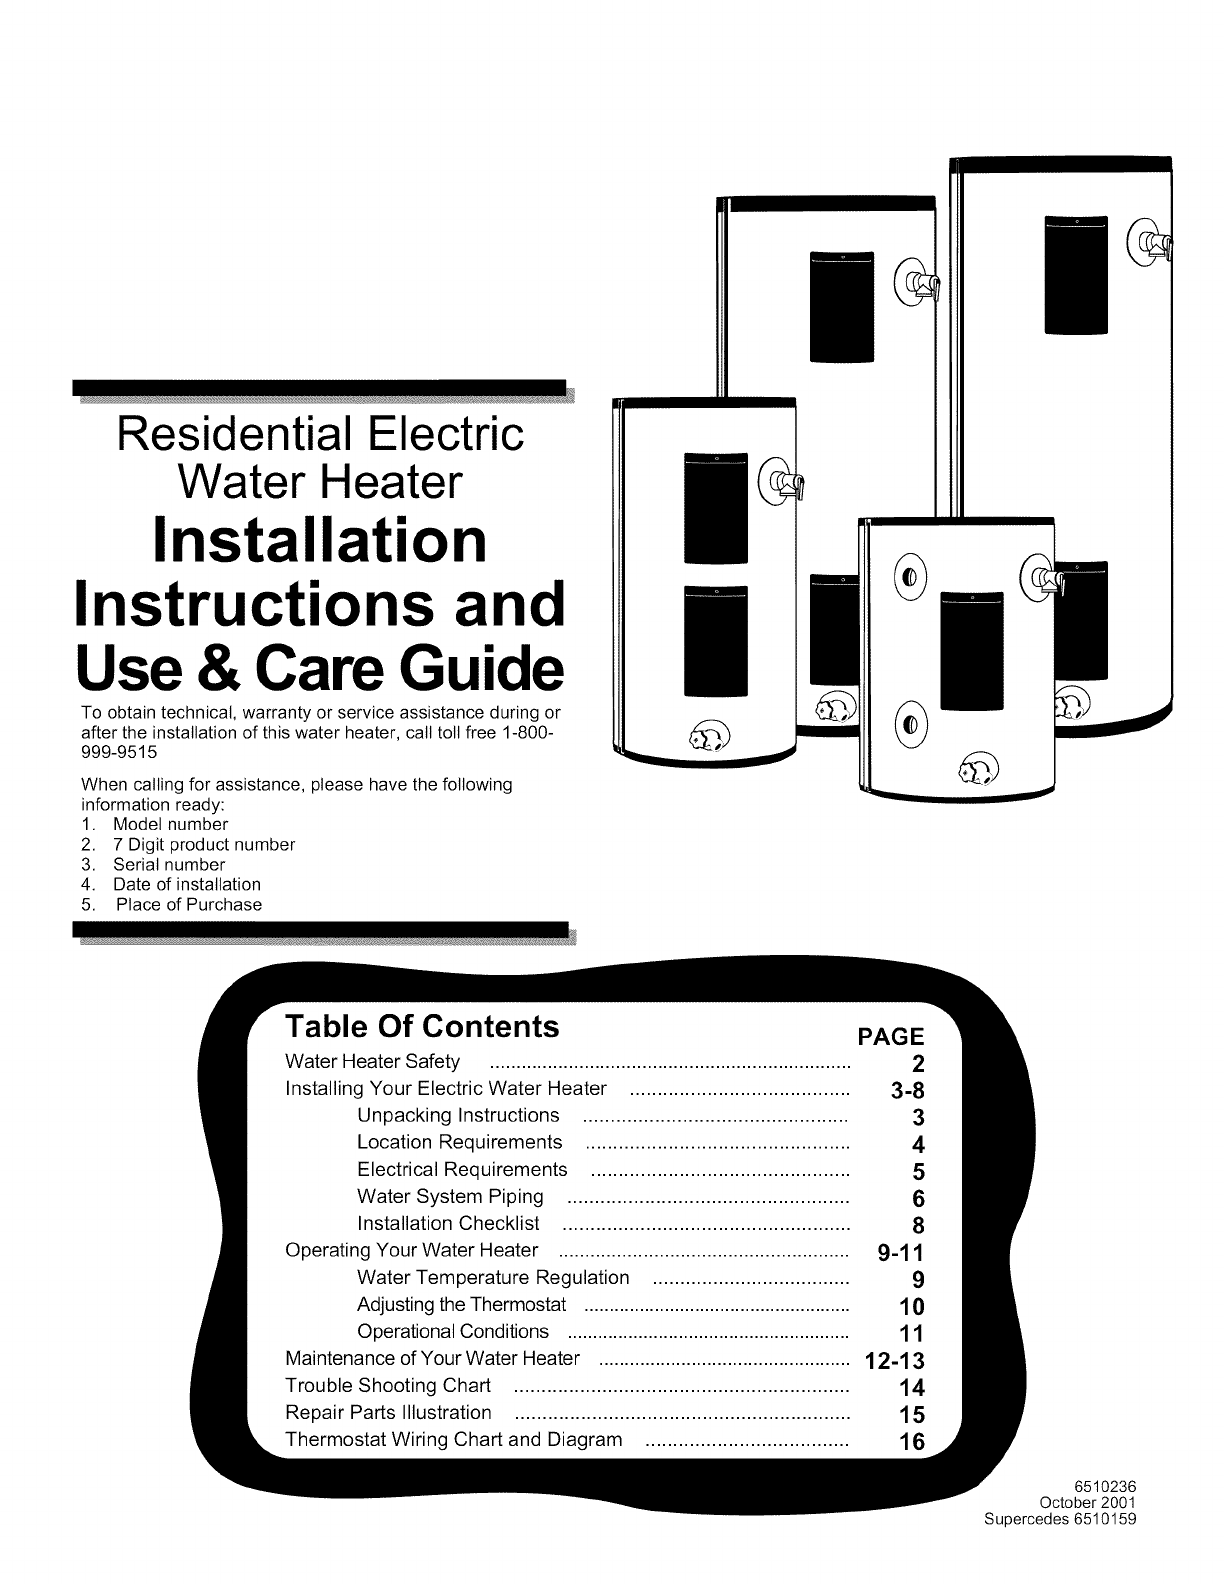 Wiring A Electric Water Heater Diagram from usermanual.wiki